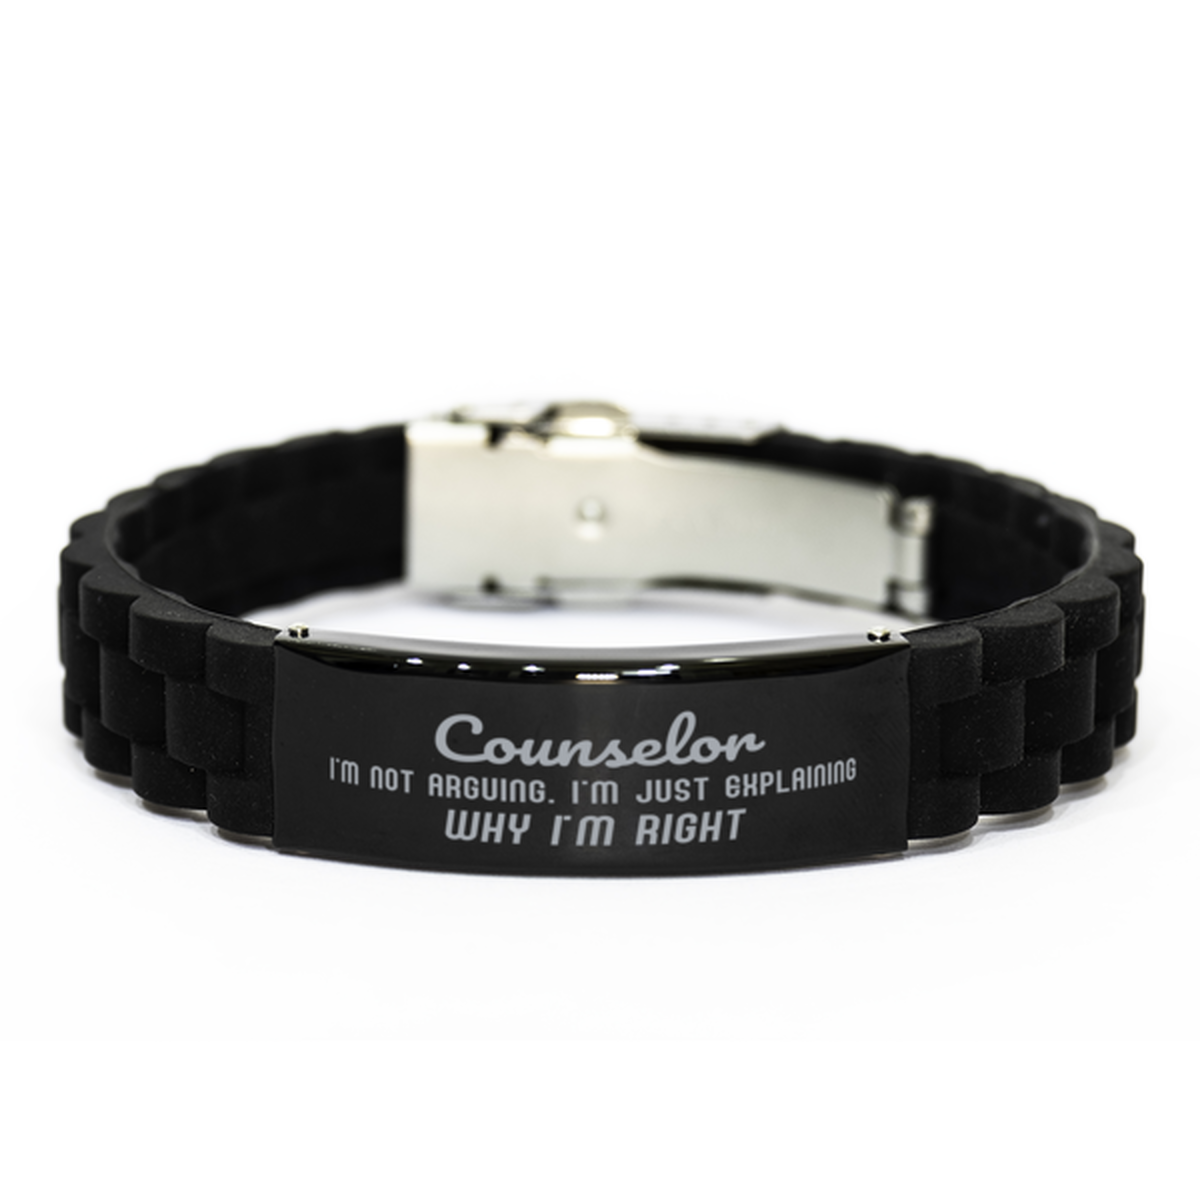 Counselor I'm not Arguing. I'm Just Explaining Why I'm RIGHT Black Glidelock Clasp Bracelet, Funny Saying Quote Counselor Gifts For Counselor Graduation Birthday Christmas Gifts for Men Women Coworker